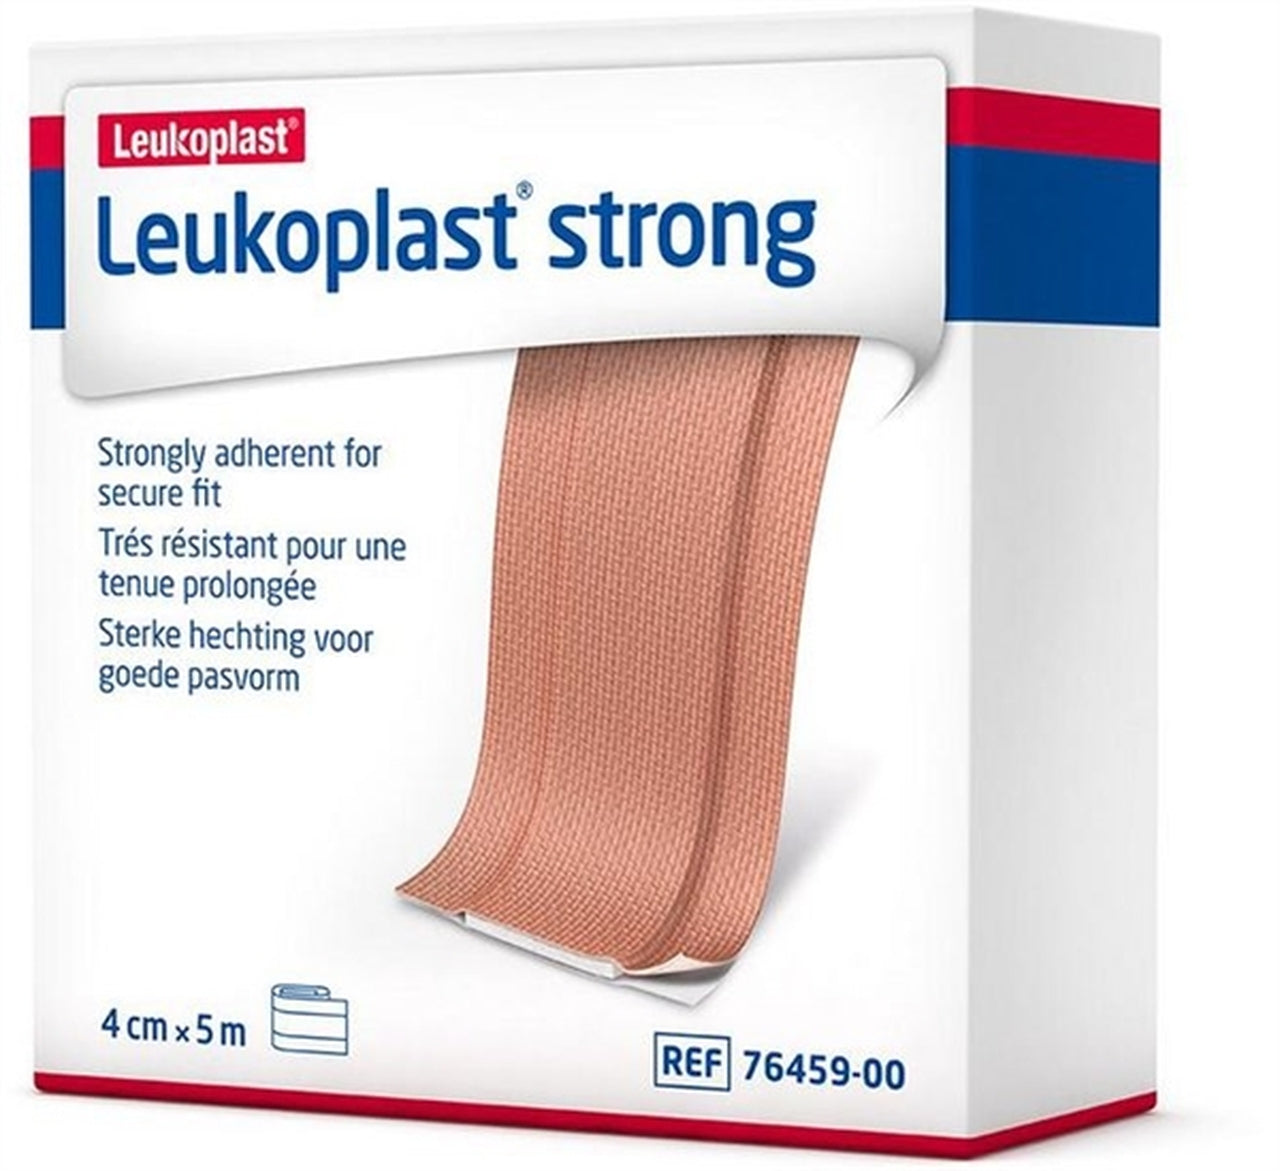 1 Leukoplast Strong Adhesive Doctor's Set (Assorted Sizes) - Box Of 101 - Home Health Store Inc